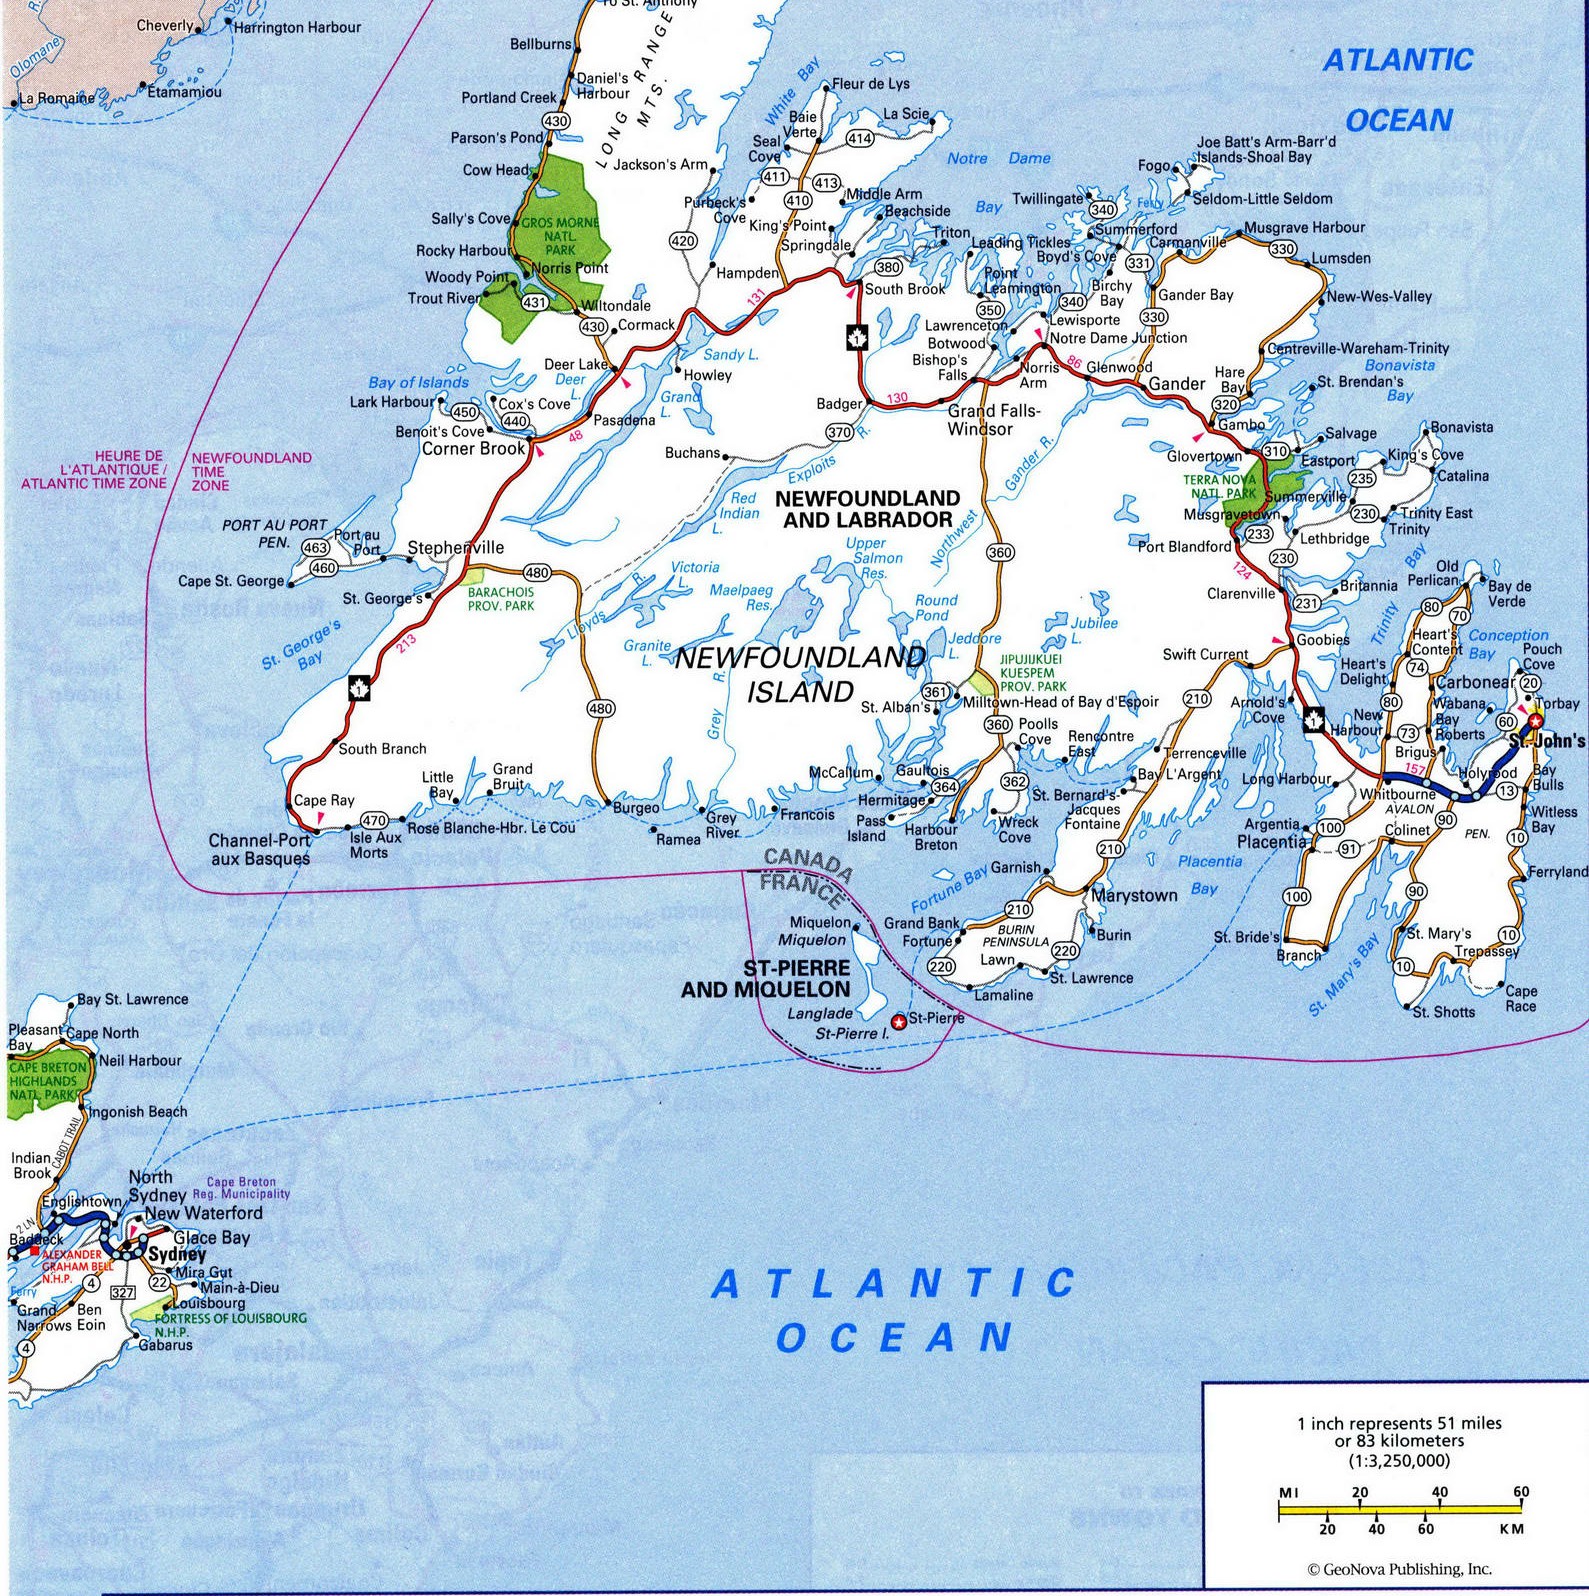 Map of Newfoundland Island with cities and roads